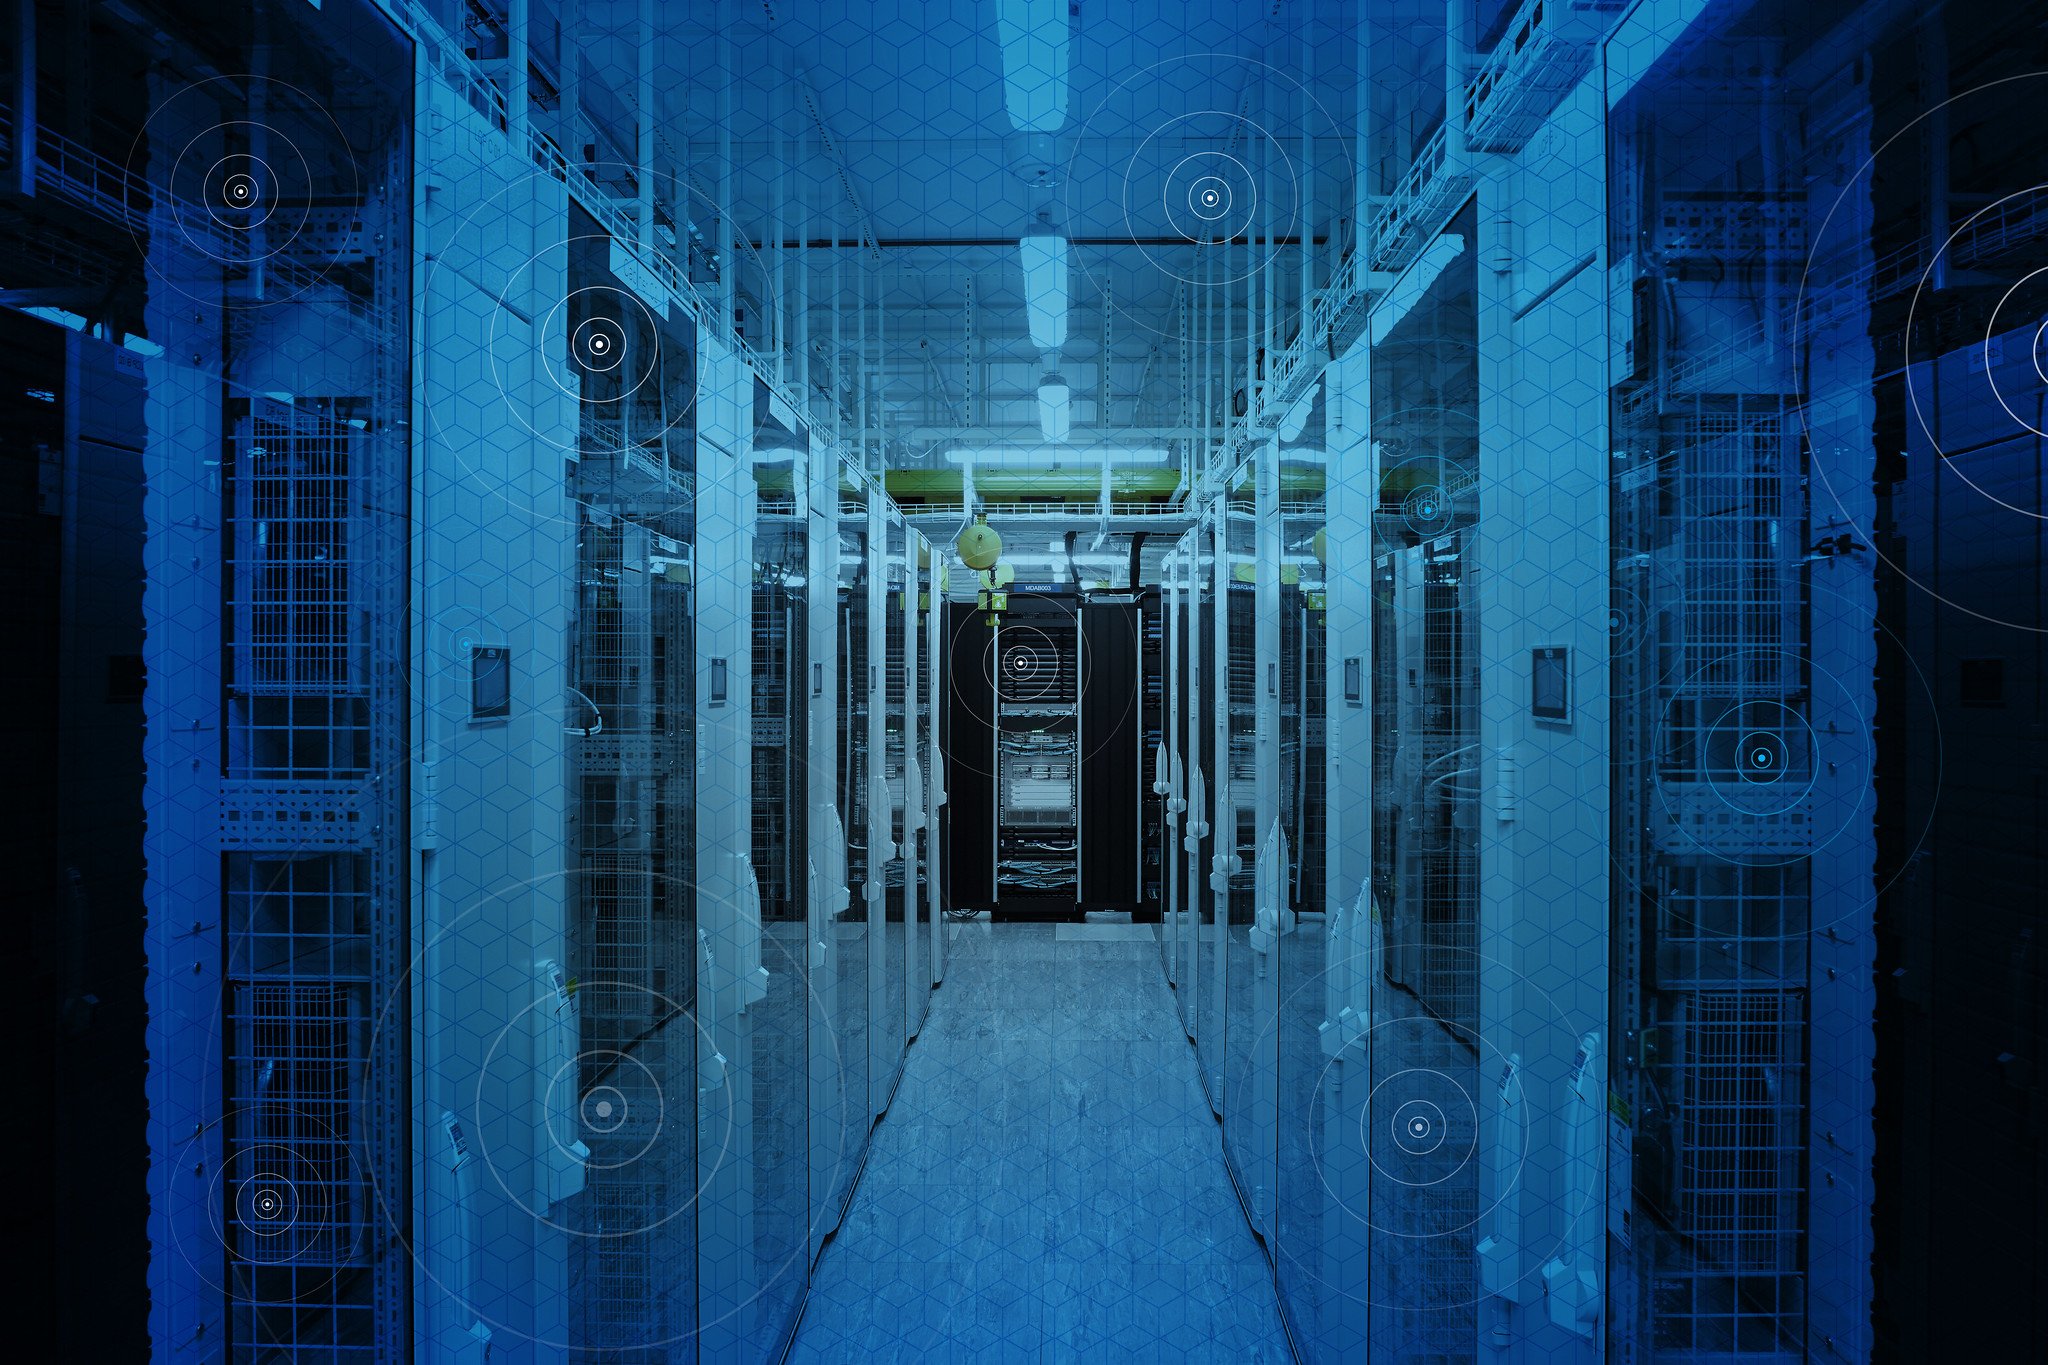 hero image showing datacenter legacy hardware to increase the usefull life of infrastructure